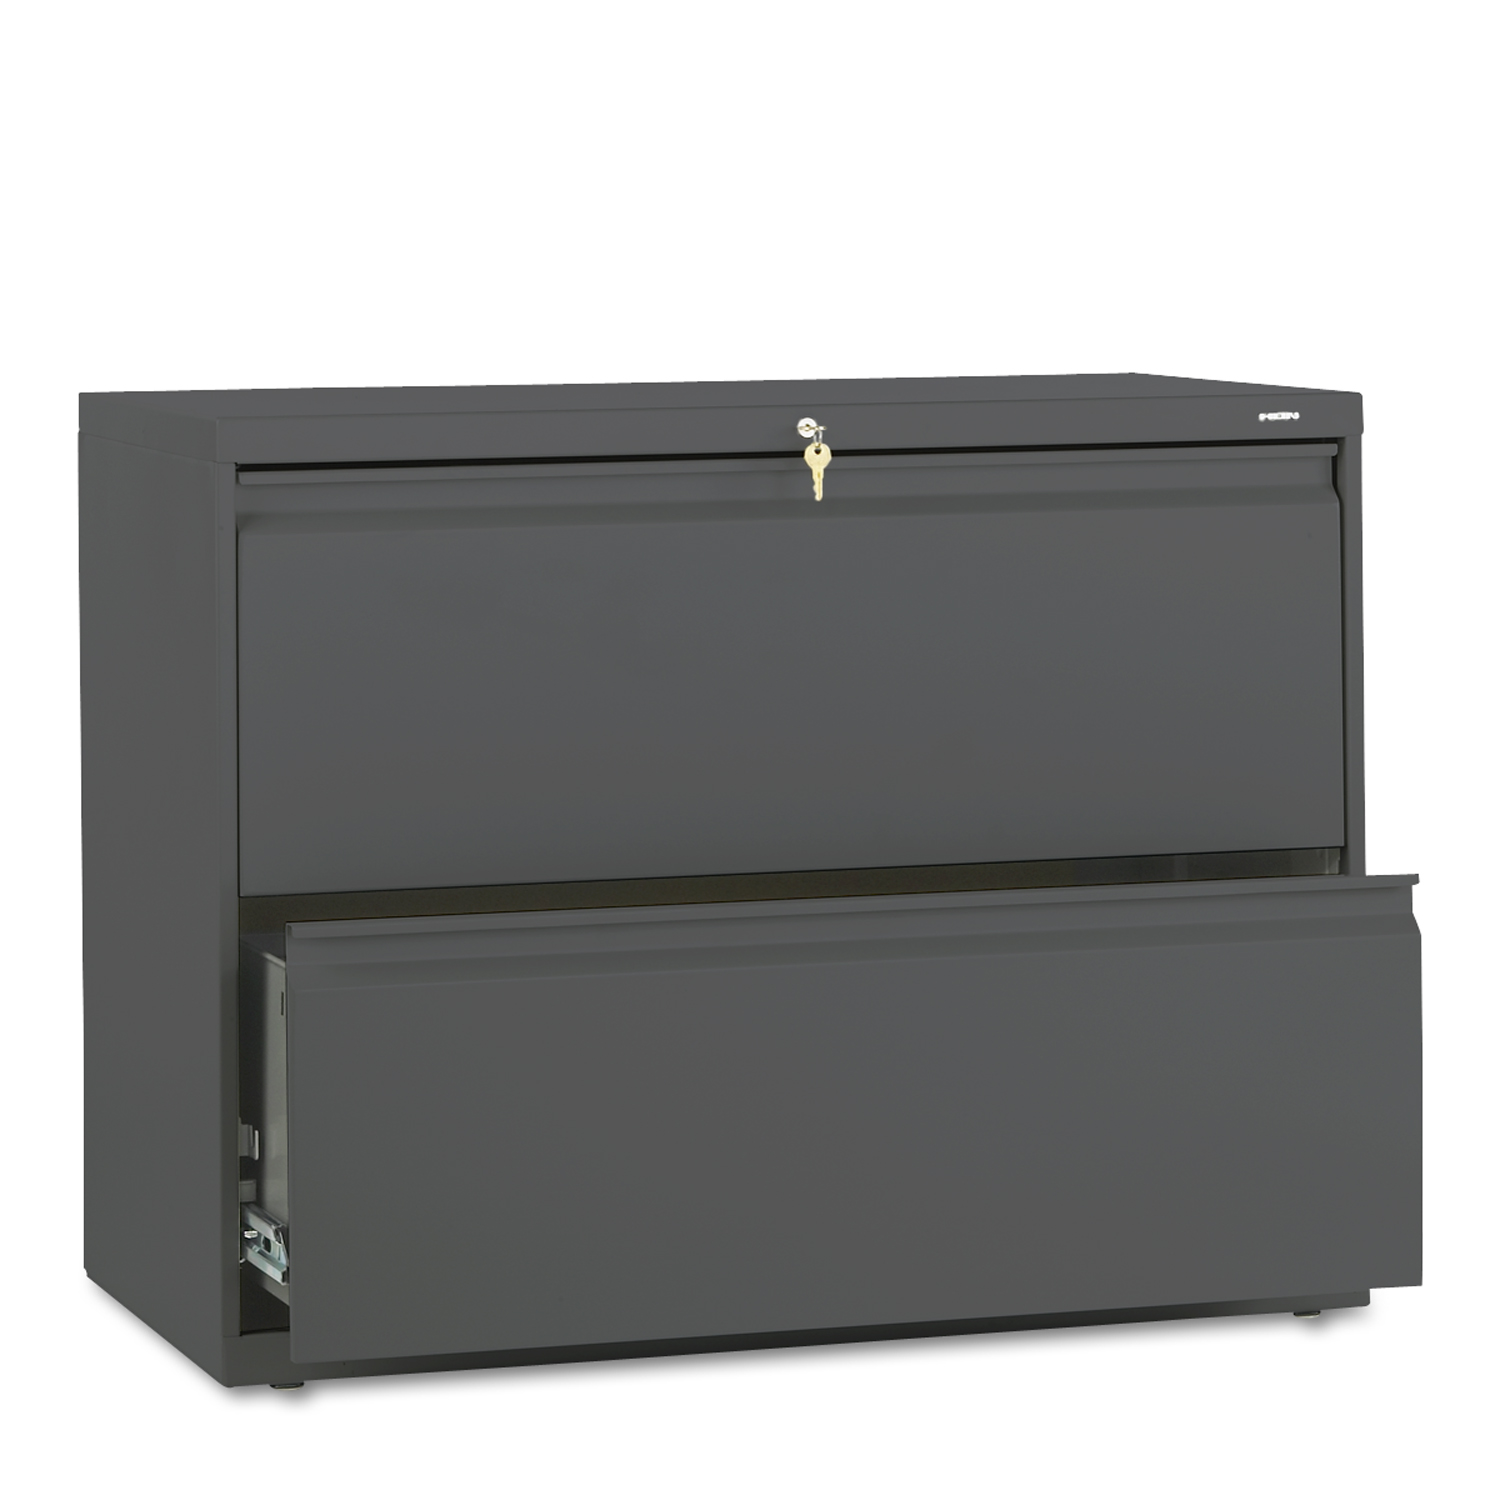 800 Series Two-Drawer Lateral File, 36w x 19-1/4d x 28-3/8h, Charcoal